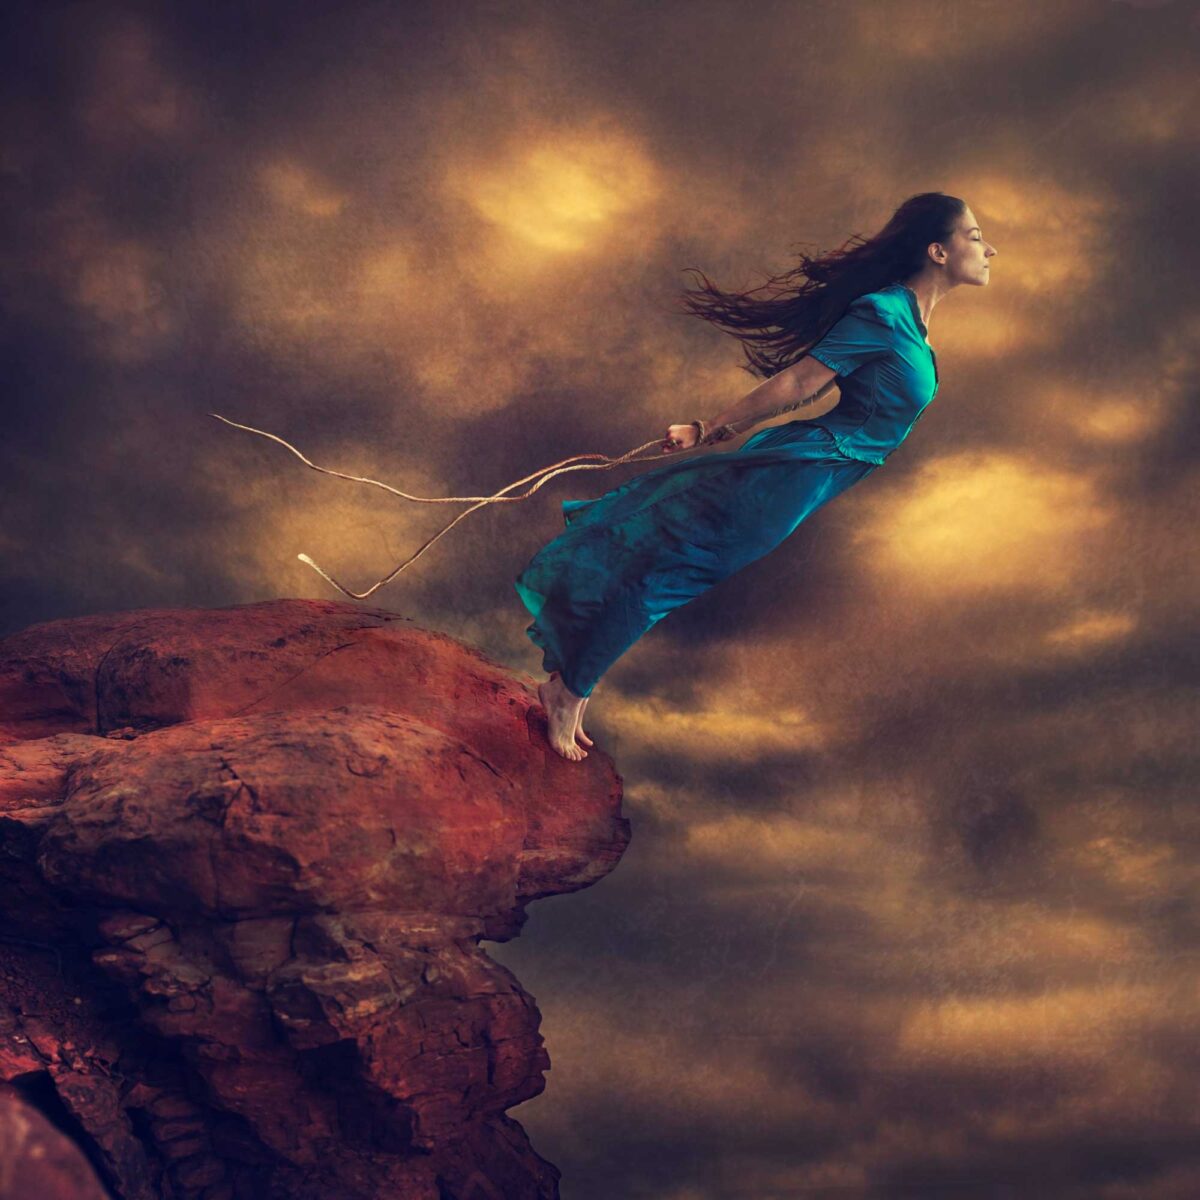 Brooke Shaden. Interview on Lens Magazine © All rights reserved.